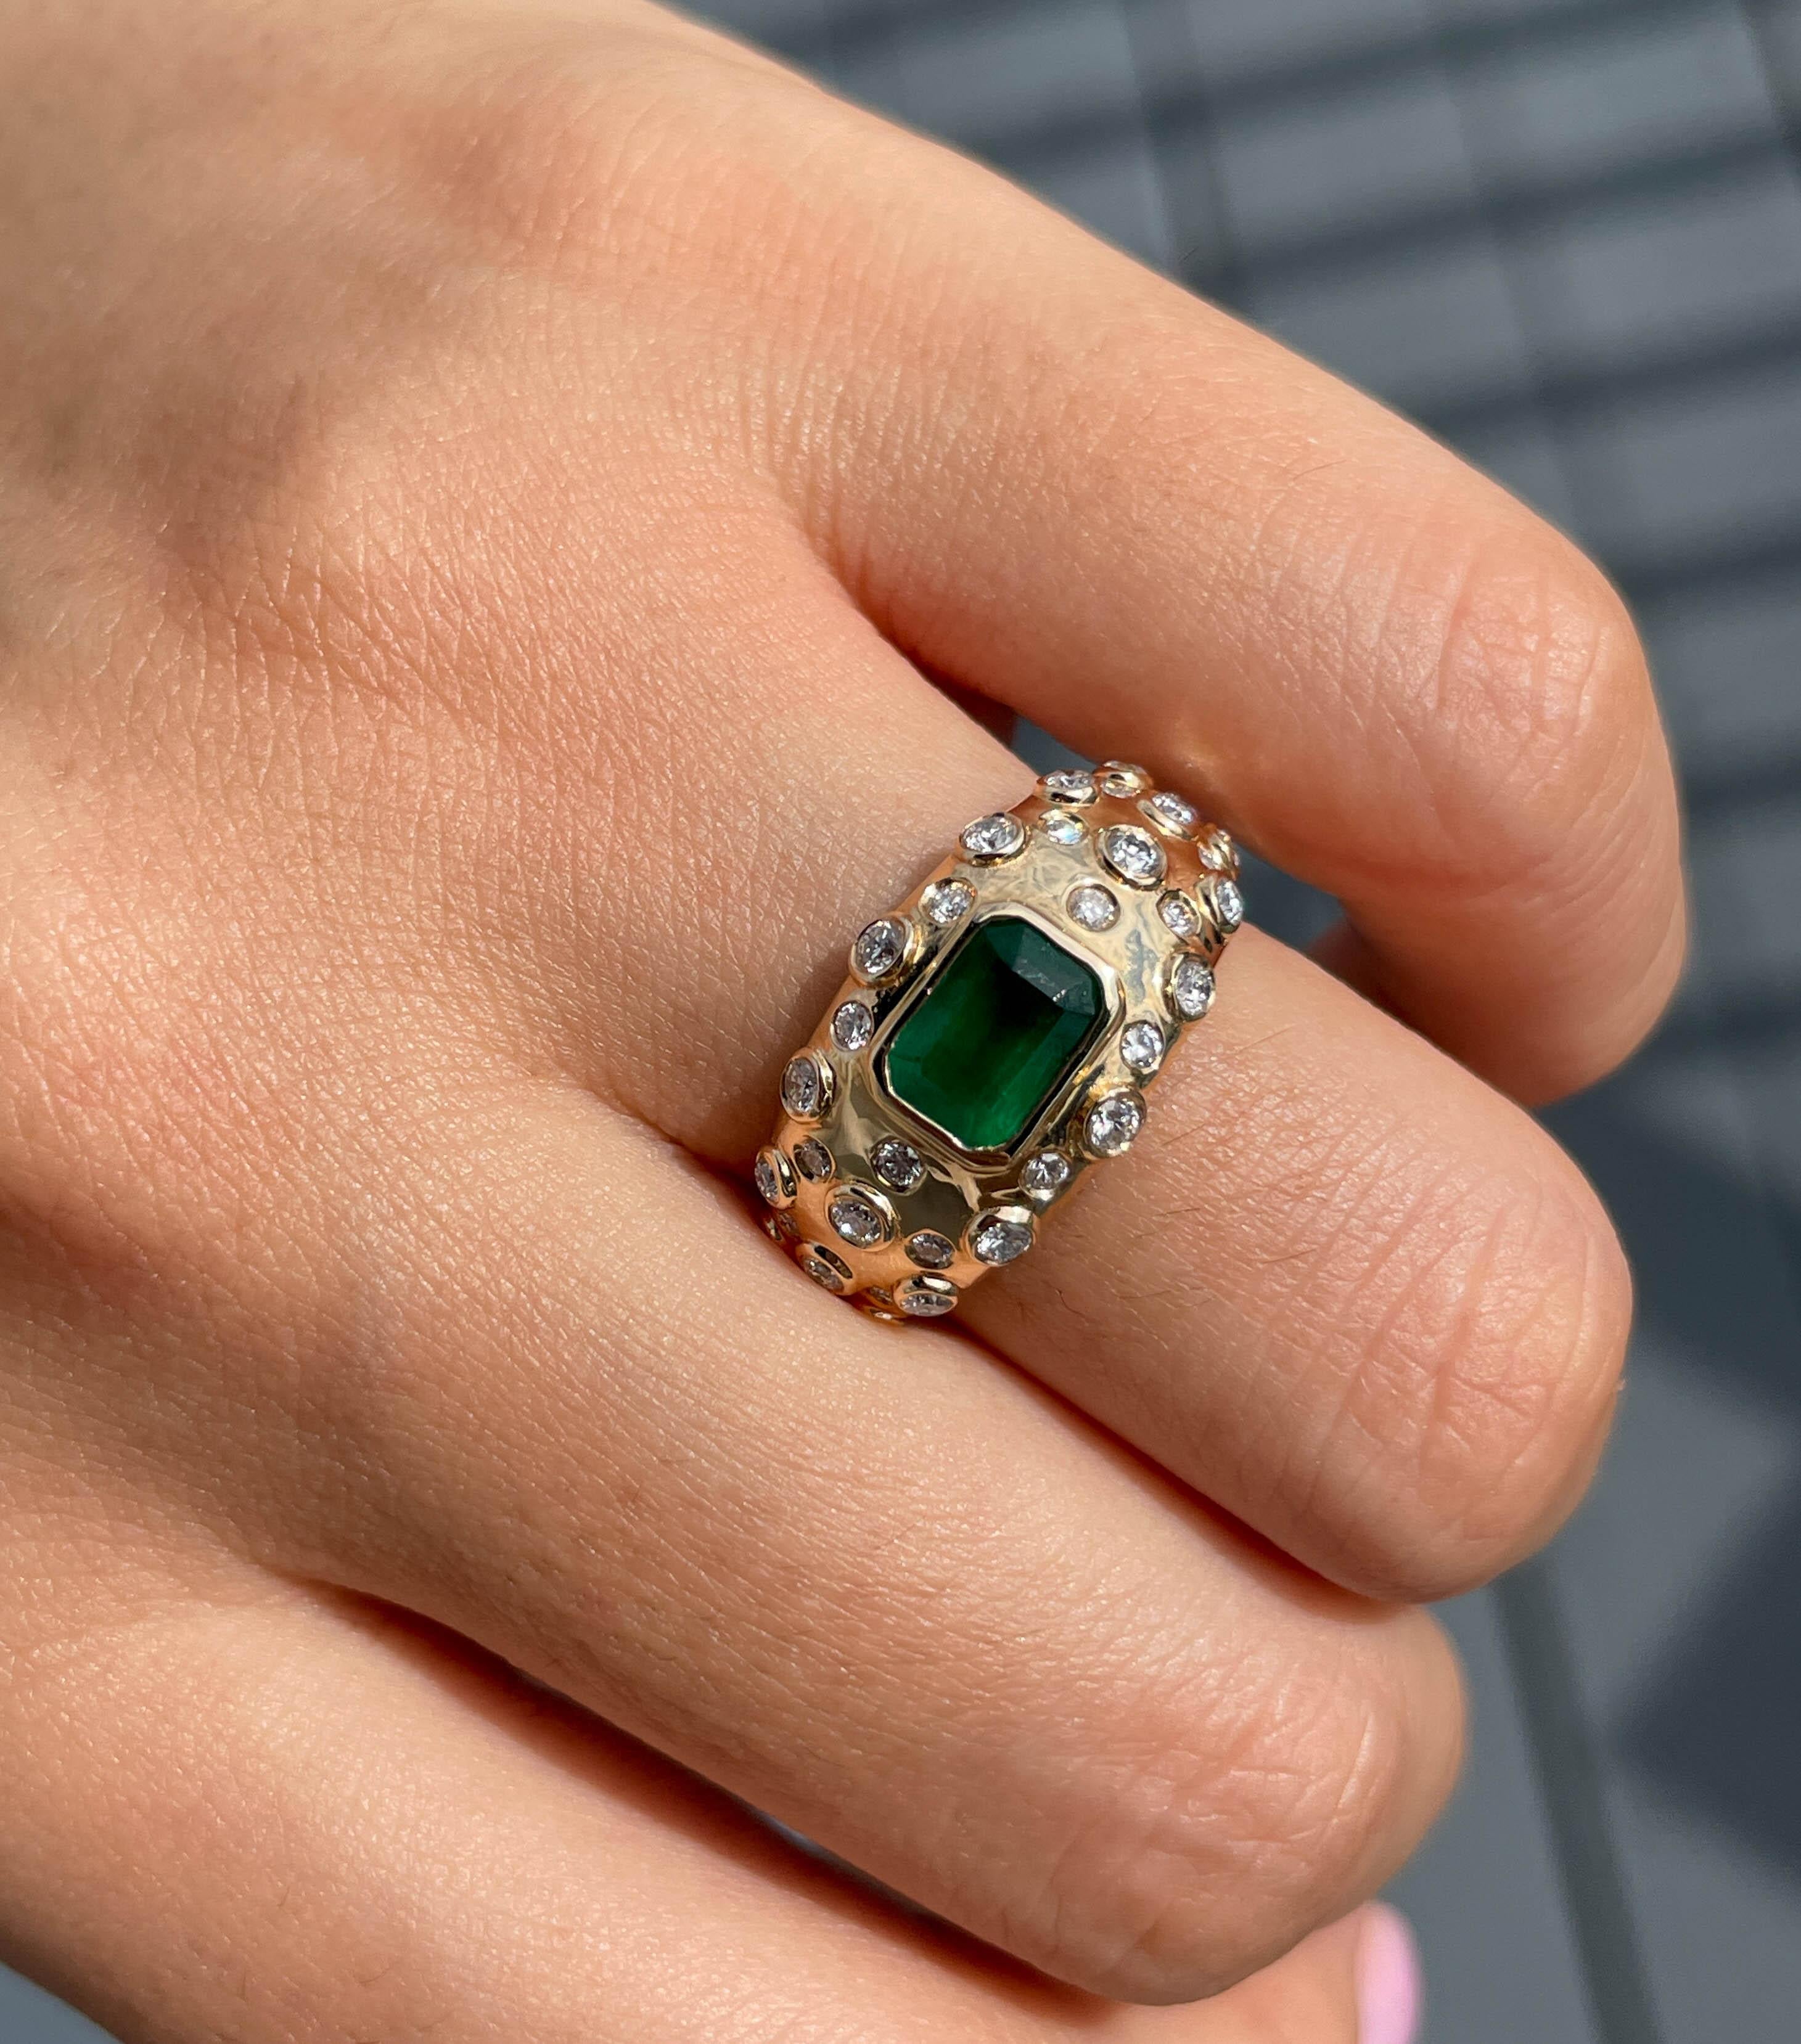 Jay Feder Green Emerald and Diamond Vintage ring in 14k Yellow gold with Step cut Green Emerald in the center weighing approximately 1.09ct. Set with small round diamonds; estimated total weight is 0.39ctw; G-H color and VS-SI clarity overall.

The